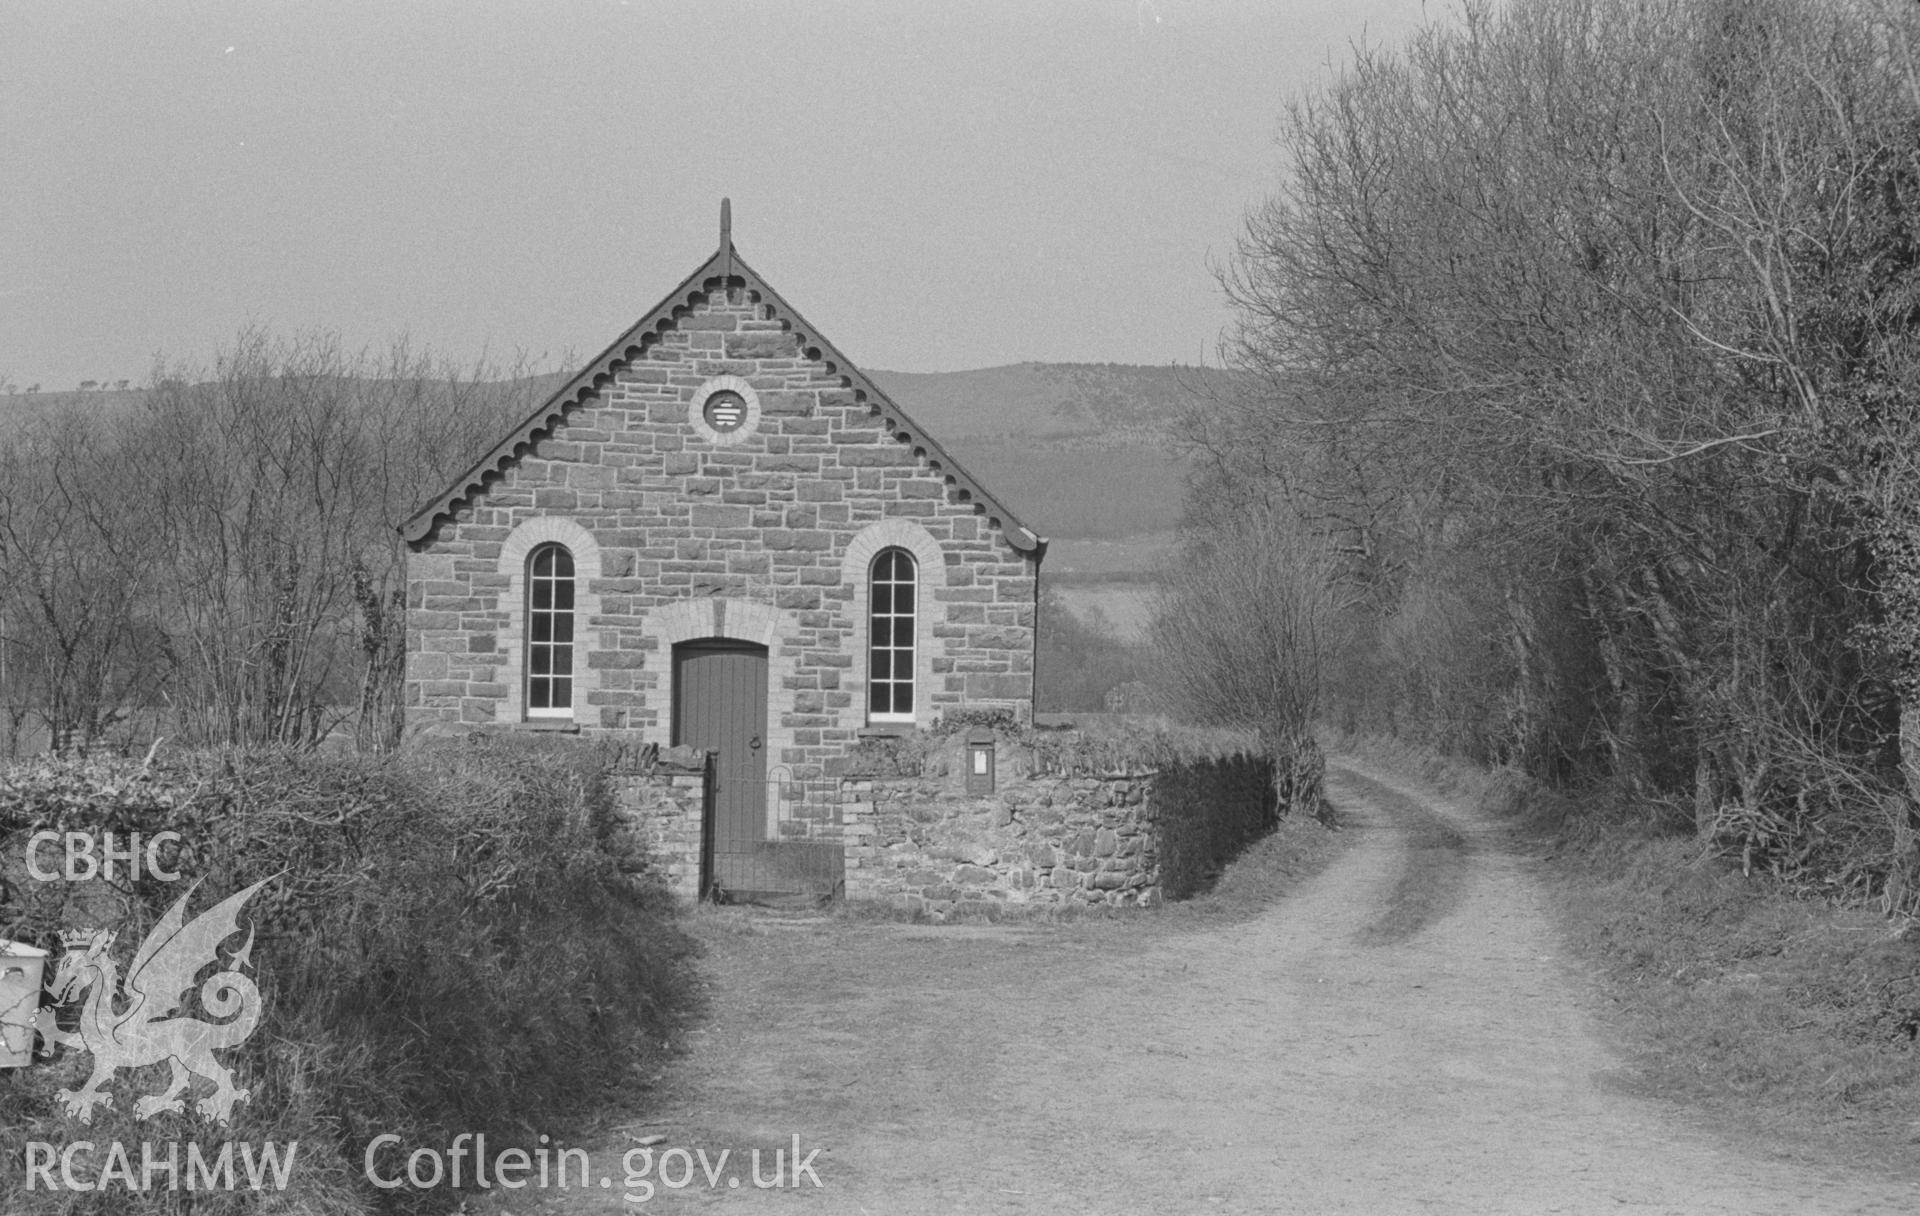 Digital copy of black & white negative showing exterior front elevation of Dyffryn Calvinistic Methodist Chapel, Llanilar. Photographed in April 1964 by Arthur O. Chater at start of Felin Dyffryn Road, from Grid Ref SN 6504 7396, looking north north east.